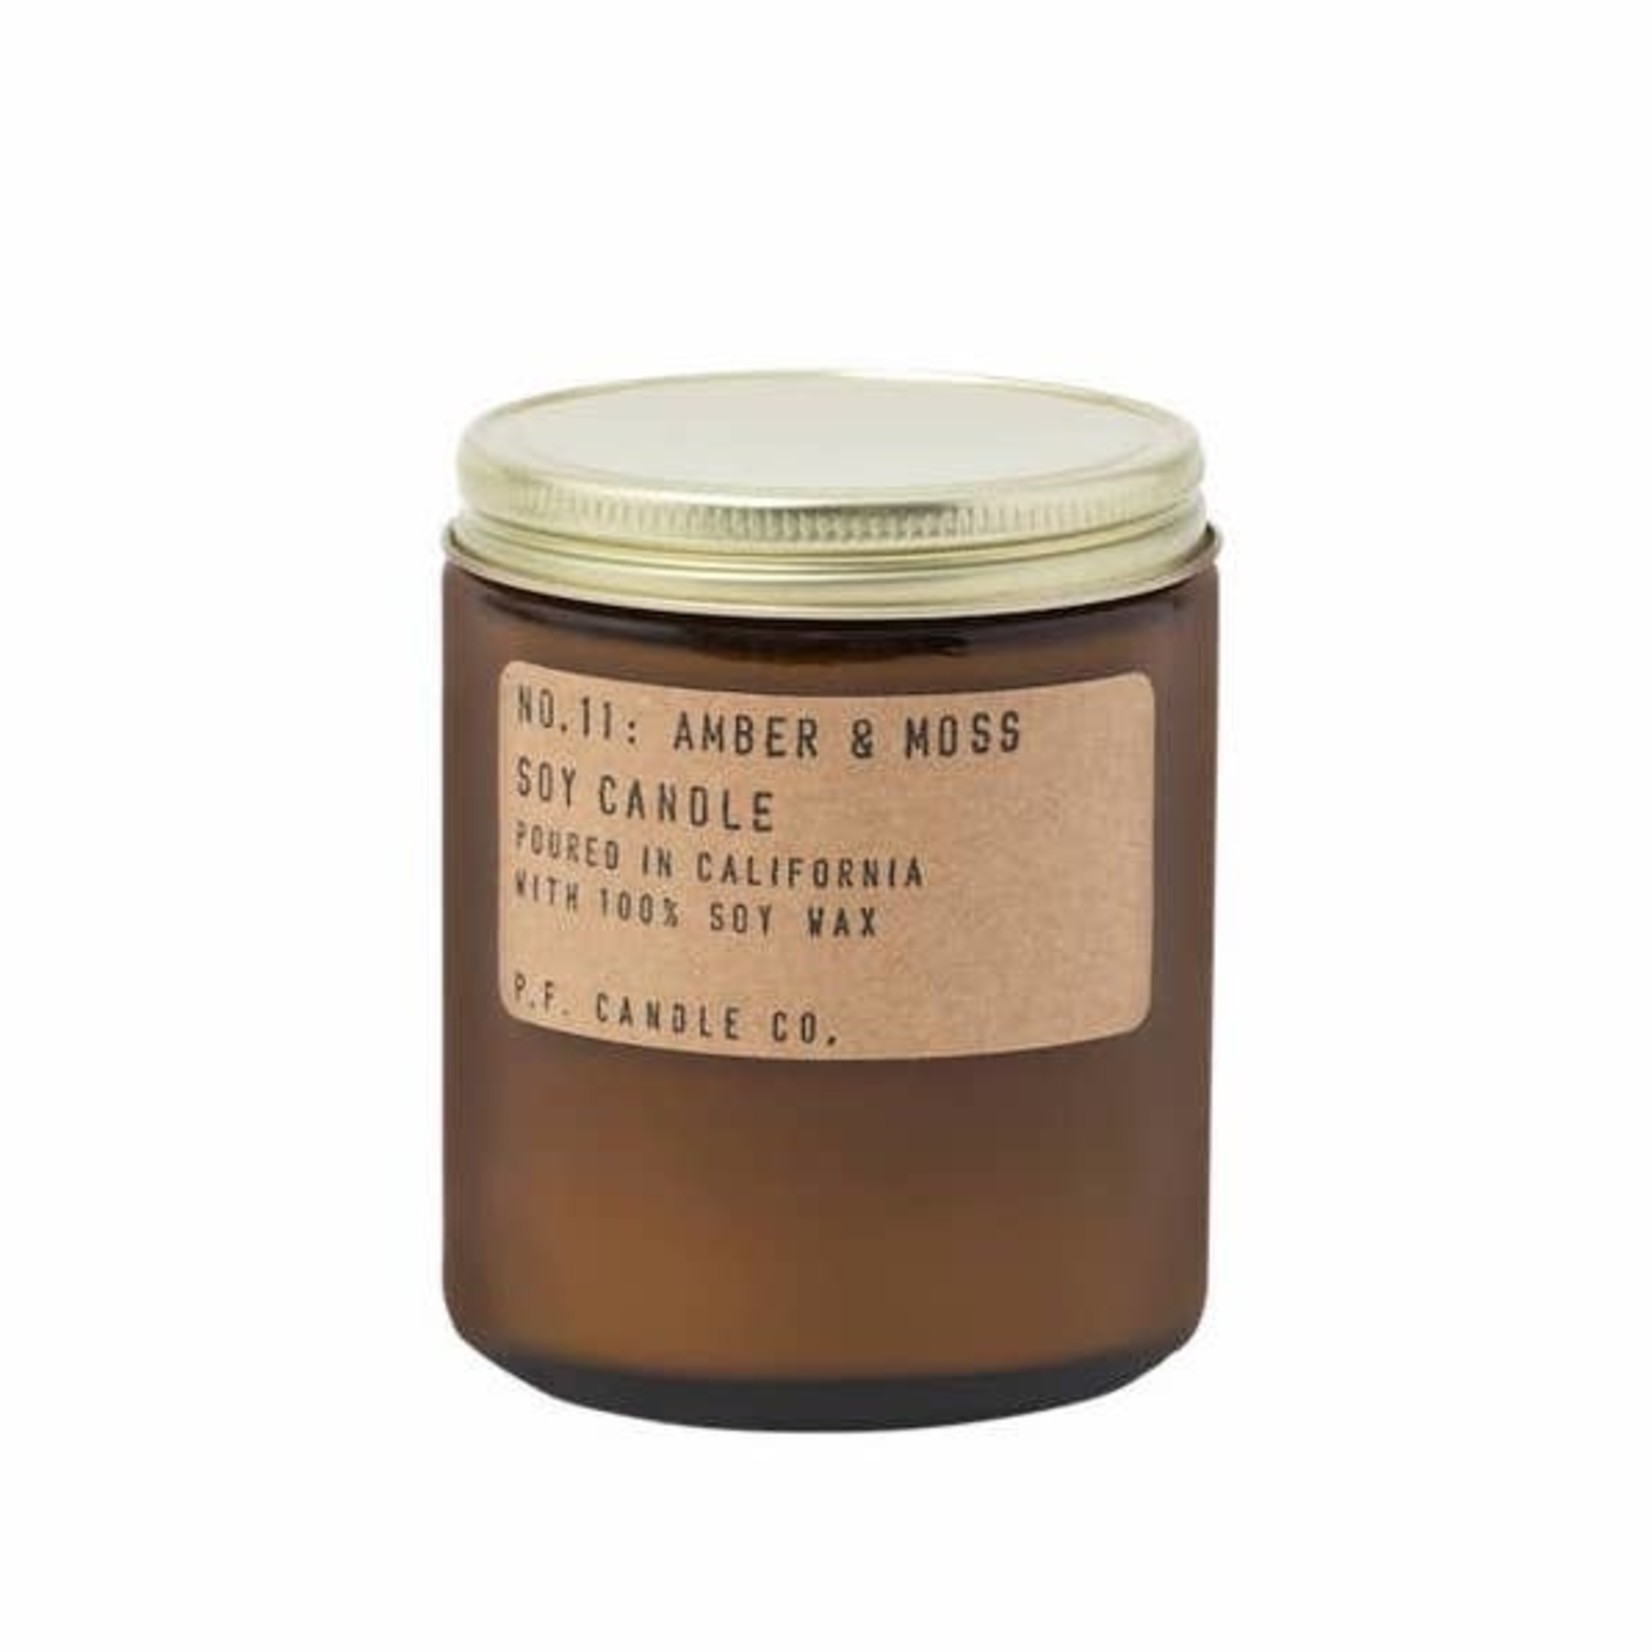 PF Candle Co Amber & Moss Candle (7.2 oz)